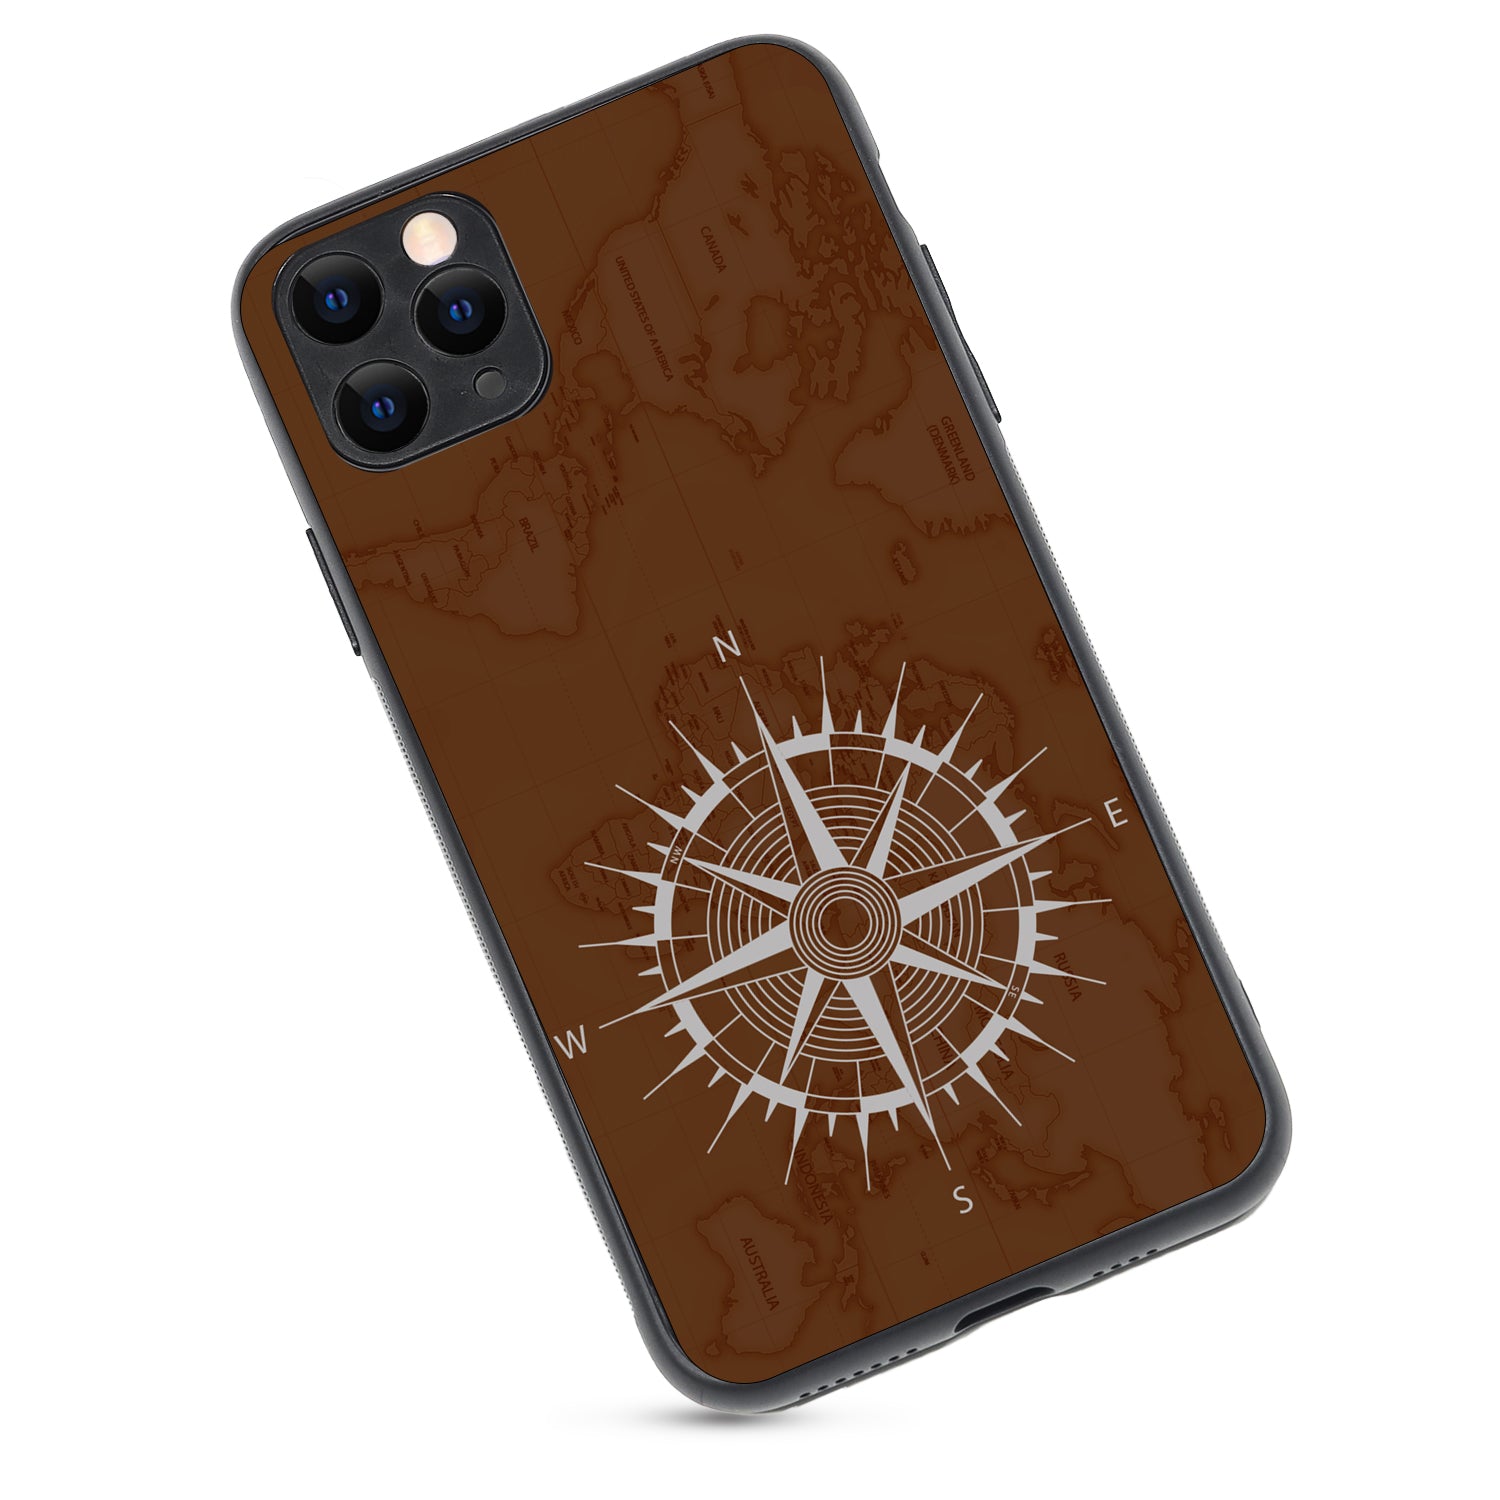 Compass Travel iPhone 11 Pro Max Case